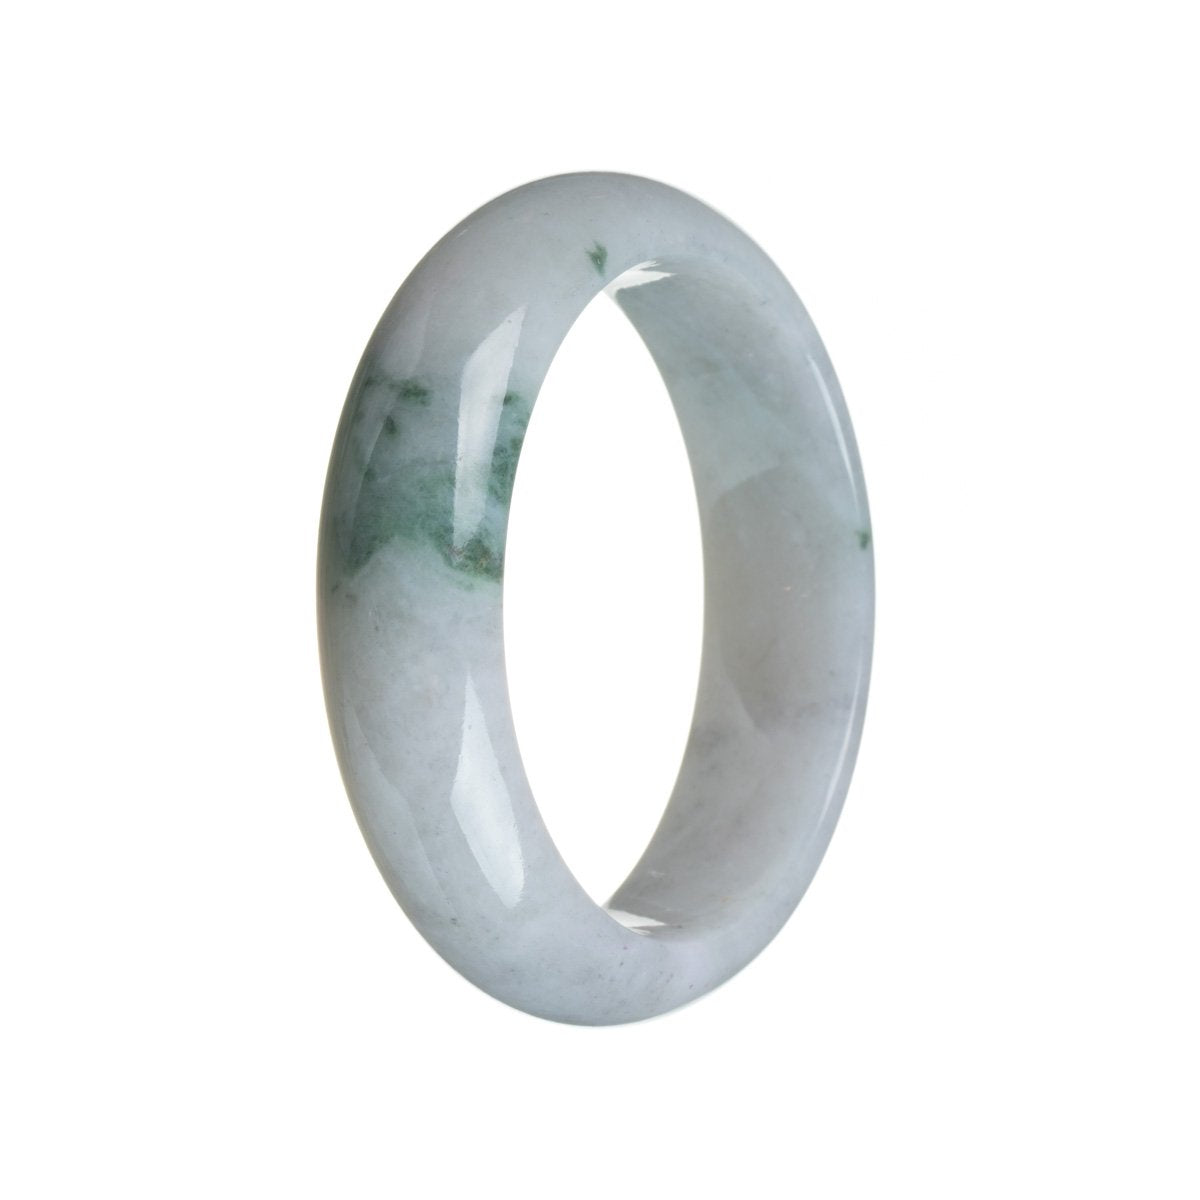 A lavender jadeite bangle with a half moon shape, measuring 54mm in diameter.